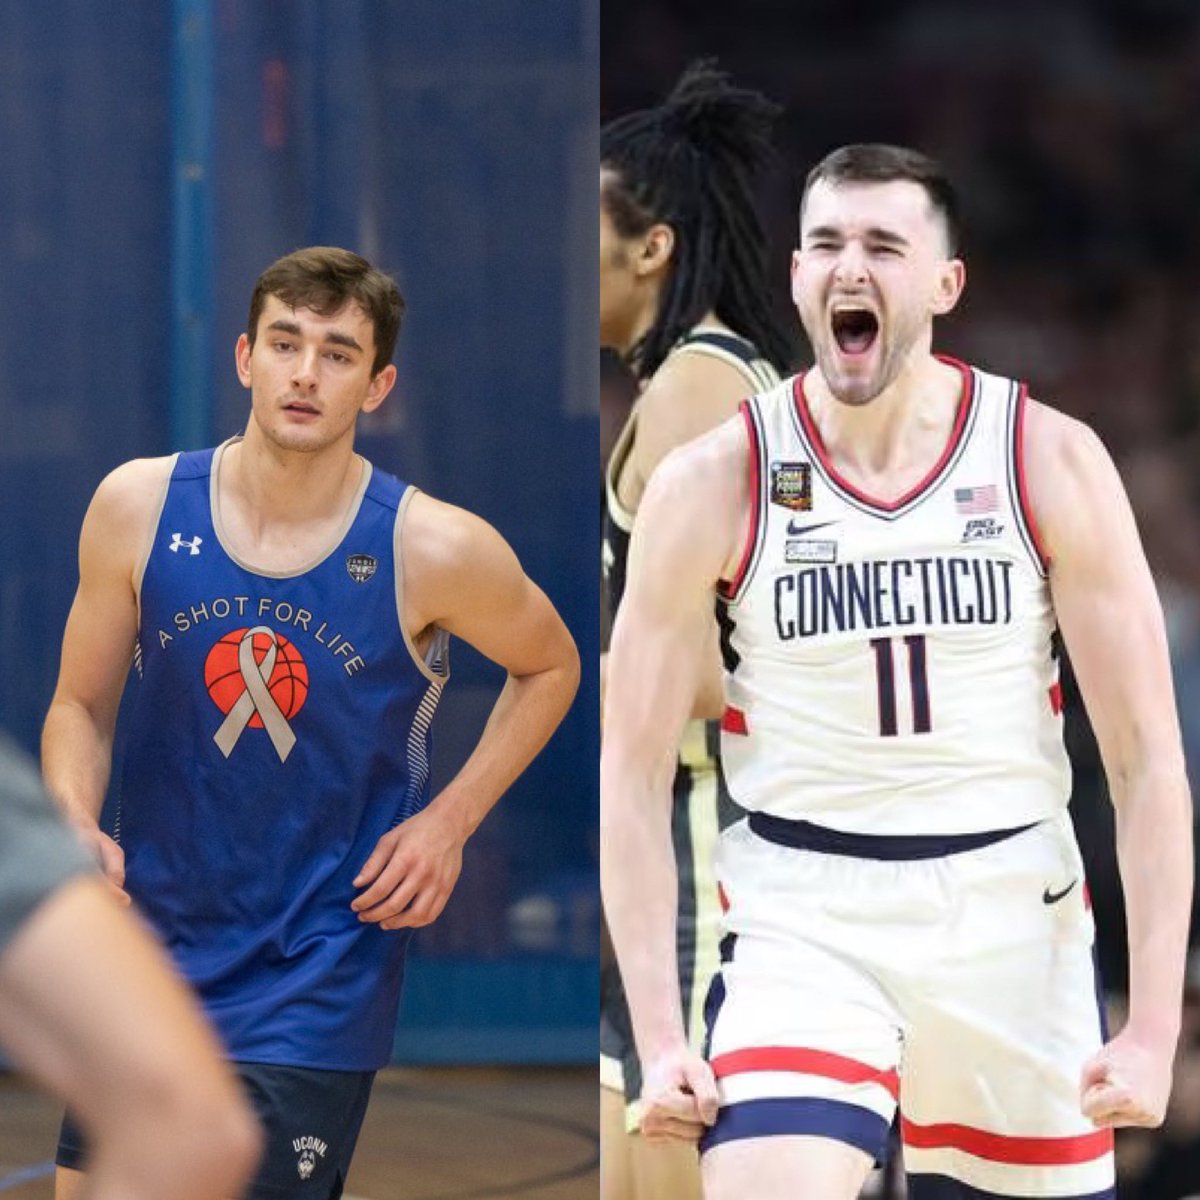 CONGRATULATIONS TO #ASFL ALUM ALEX KARABAN ON WINNING BACK TO BACK NATIONAL CHAMPIONSHIPS AT UCONN! The UConn Huskies become the first Men’s program to win back to back national championships since 2006-2007. We are so happy for you Alex!! #ASFLFamily